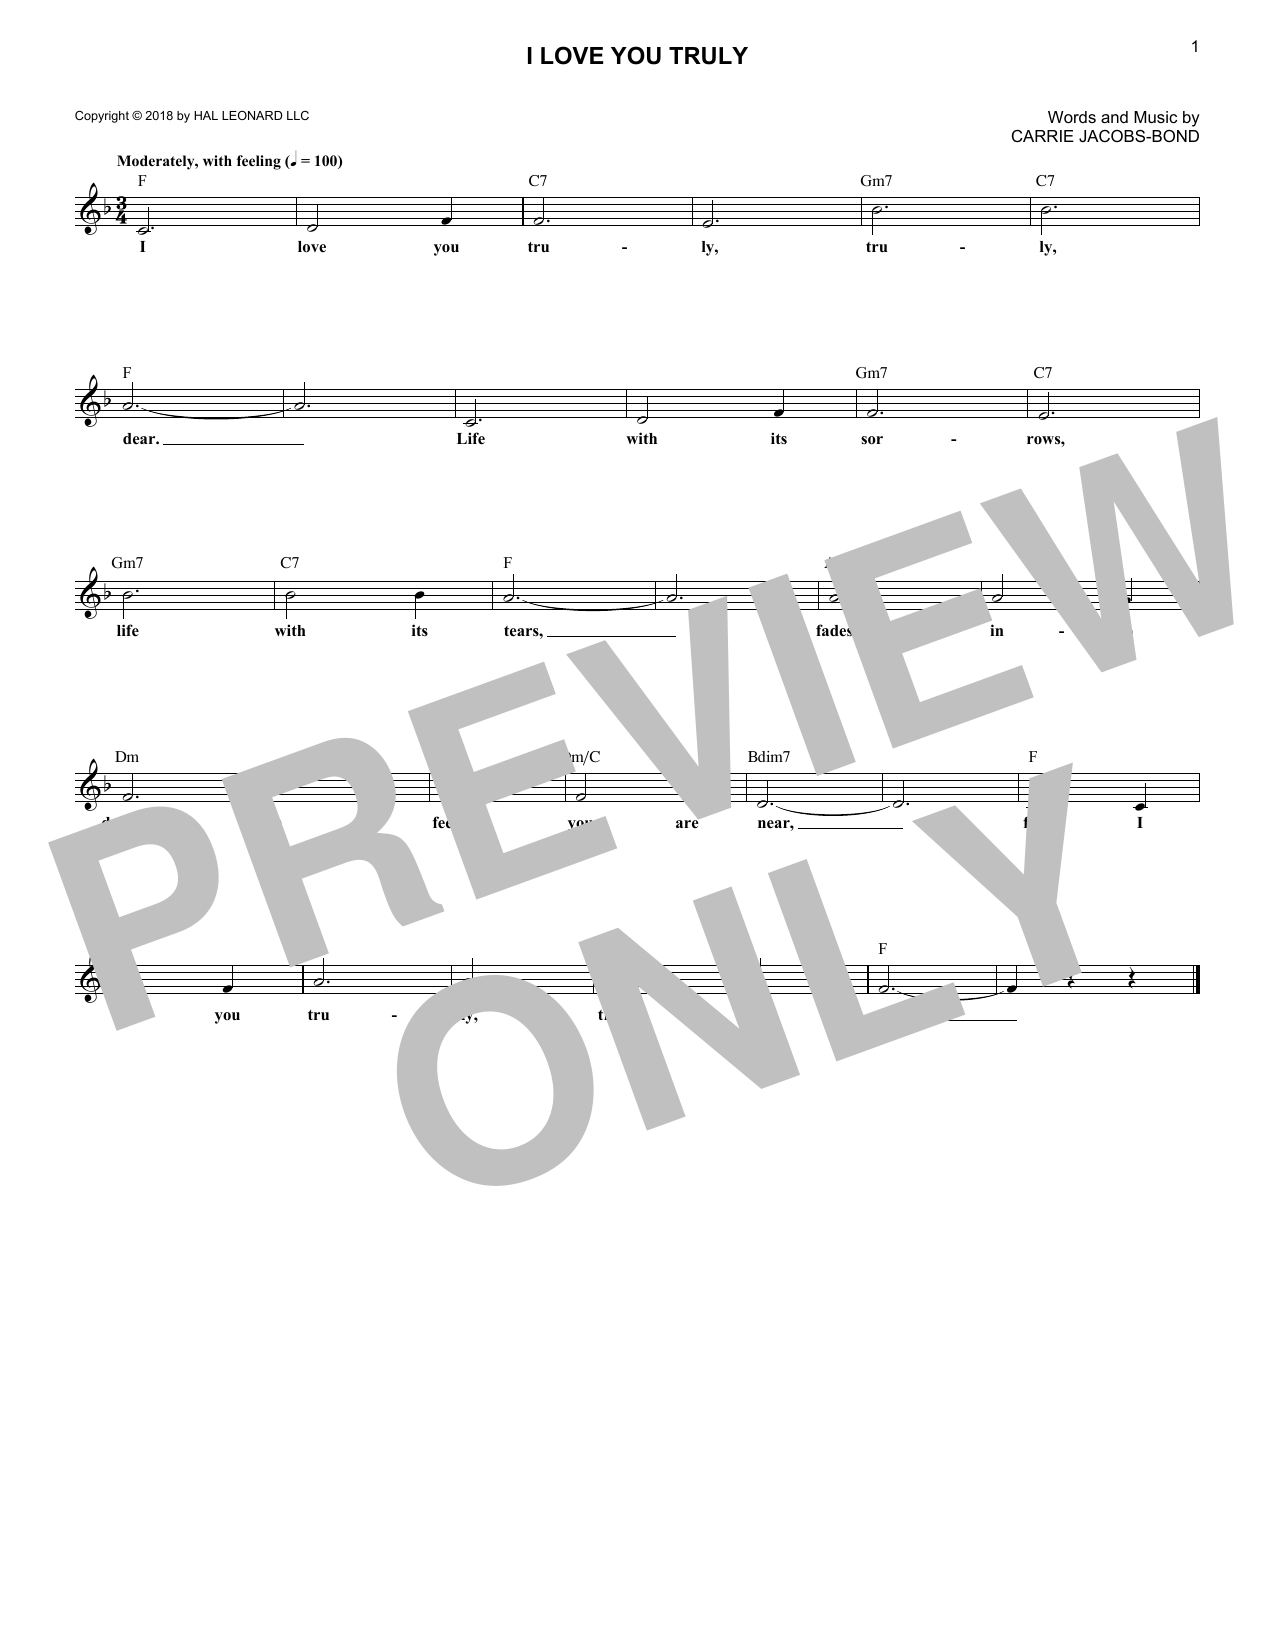 Download Carrie Jacobs-Bond I Love You Truly Sheet Music